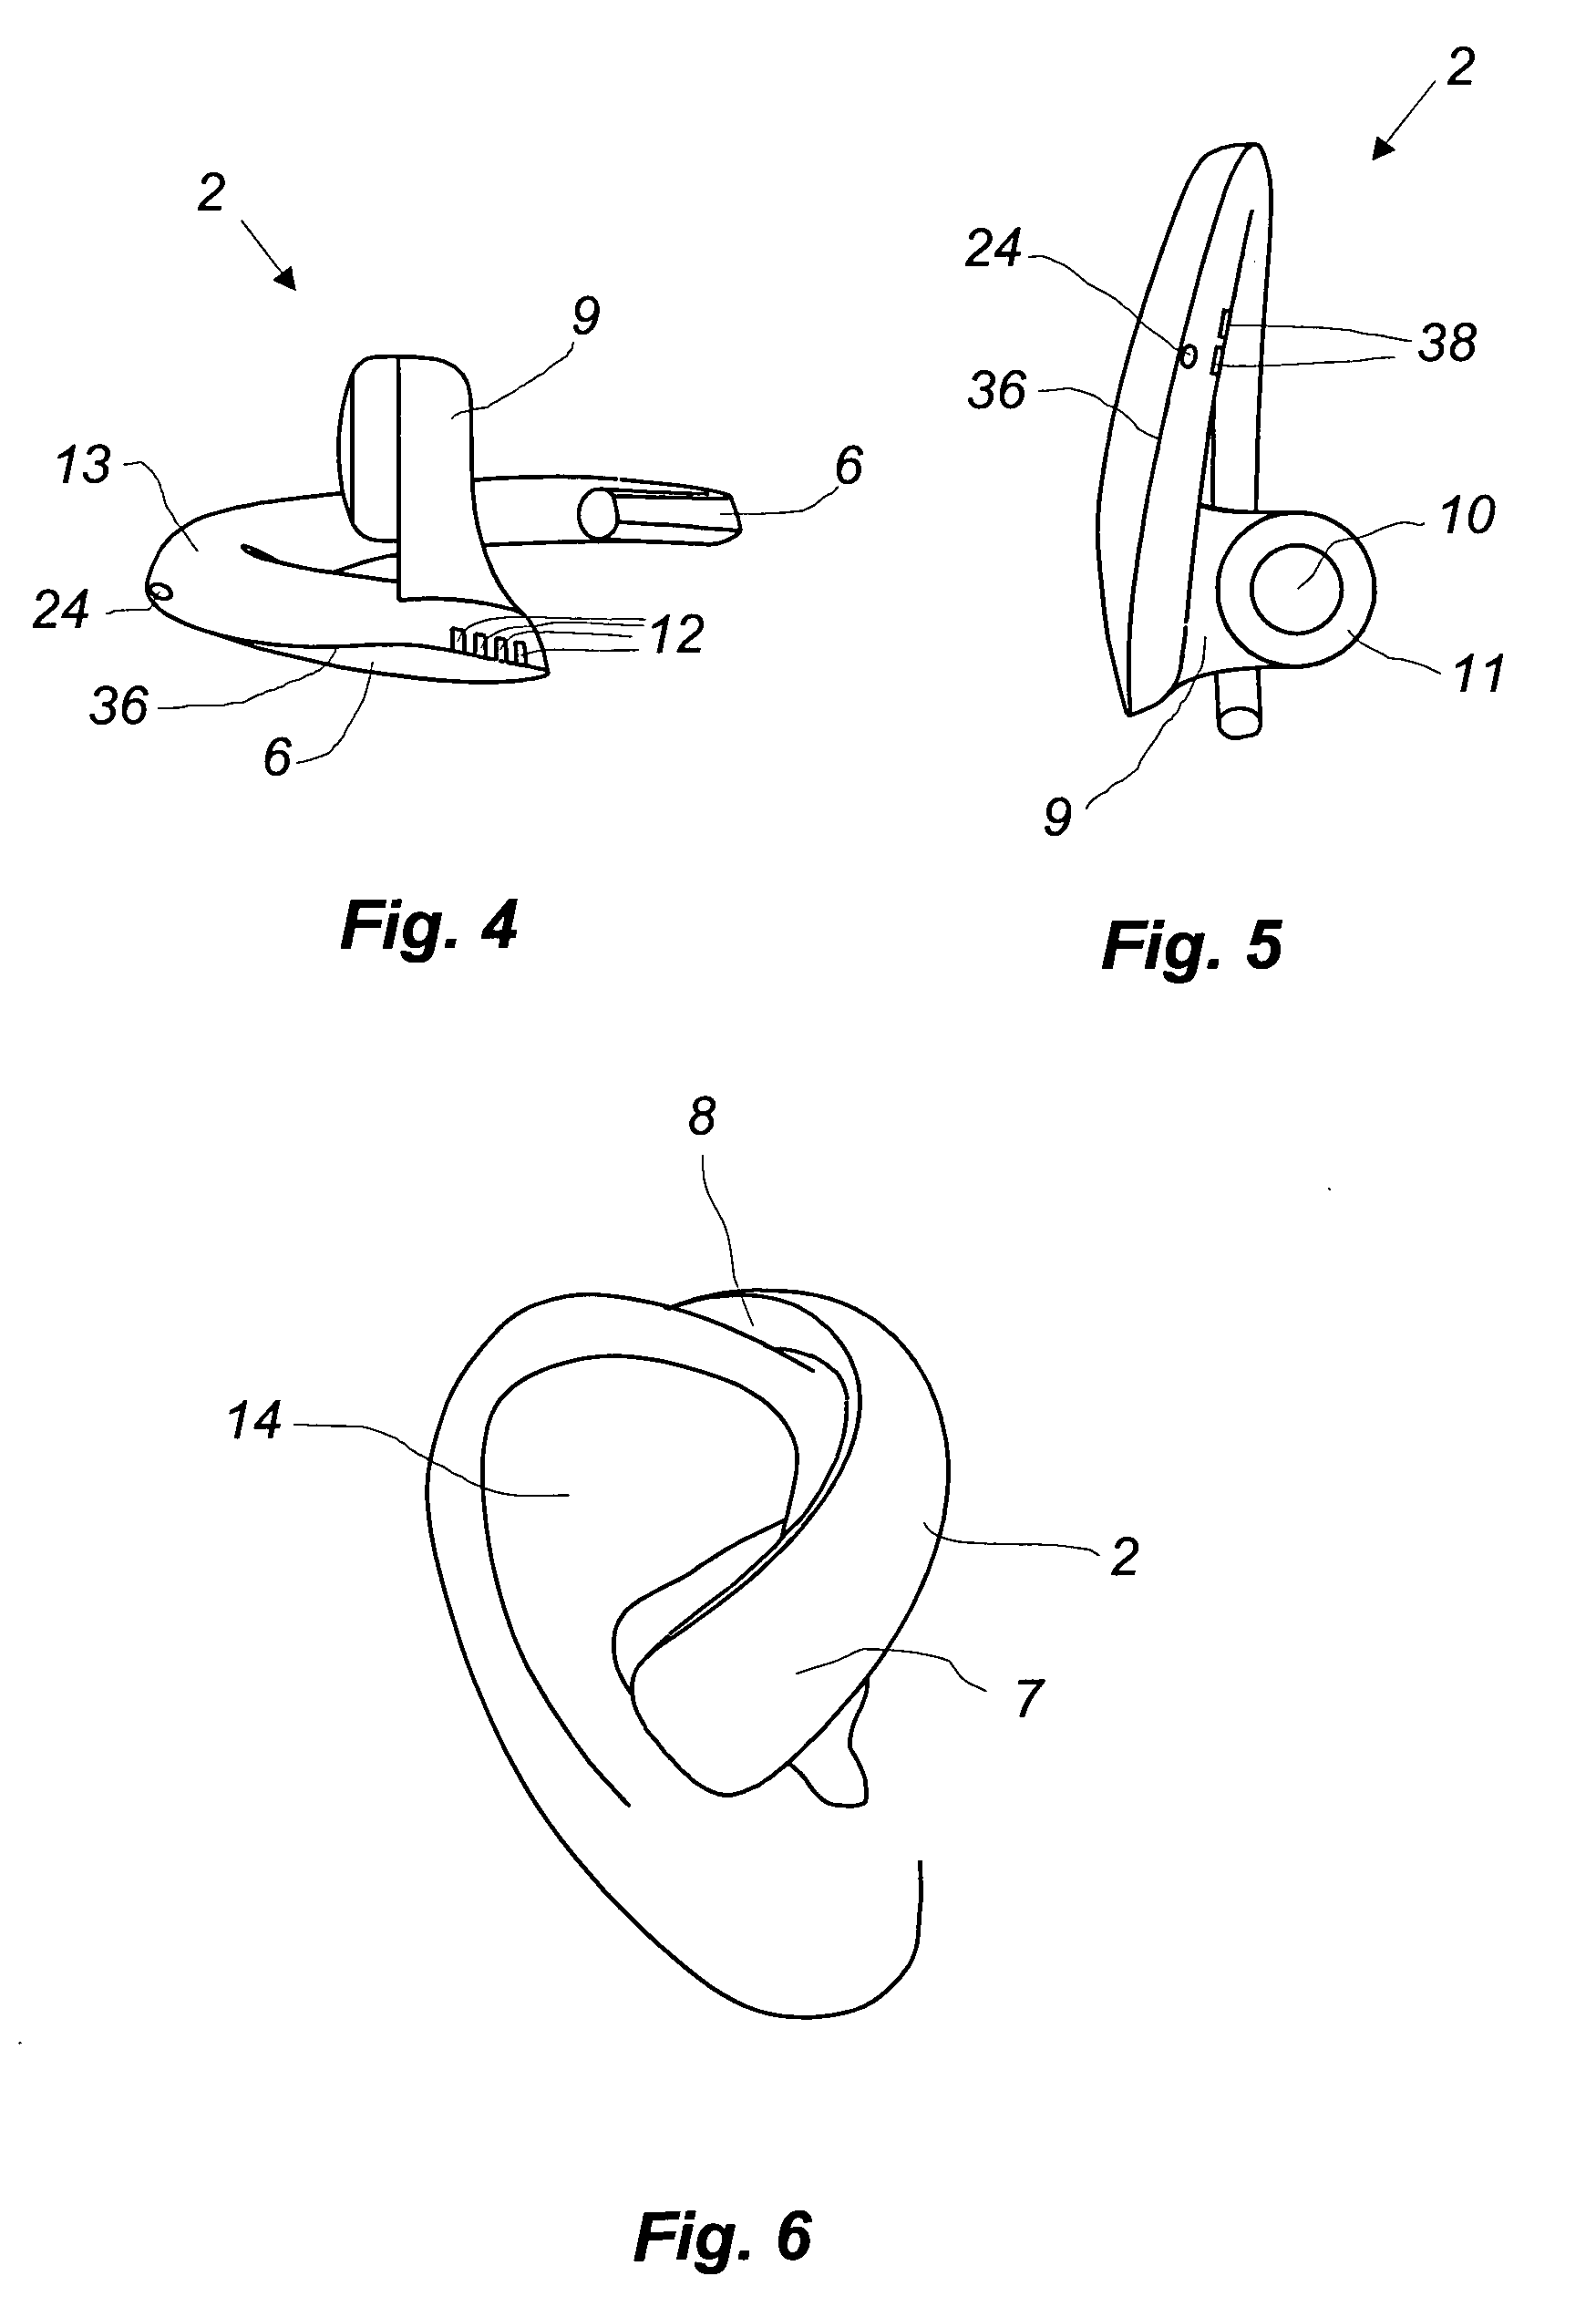 Earphone system comprising an earphone and a portable holding device